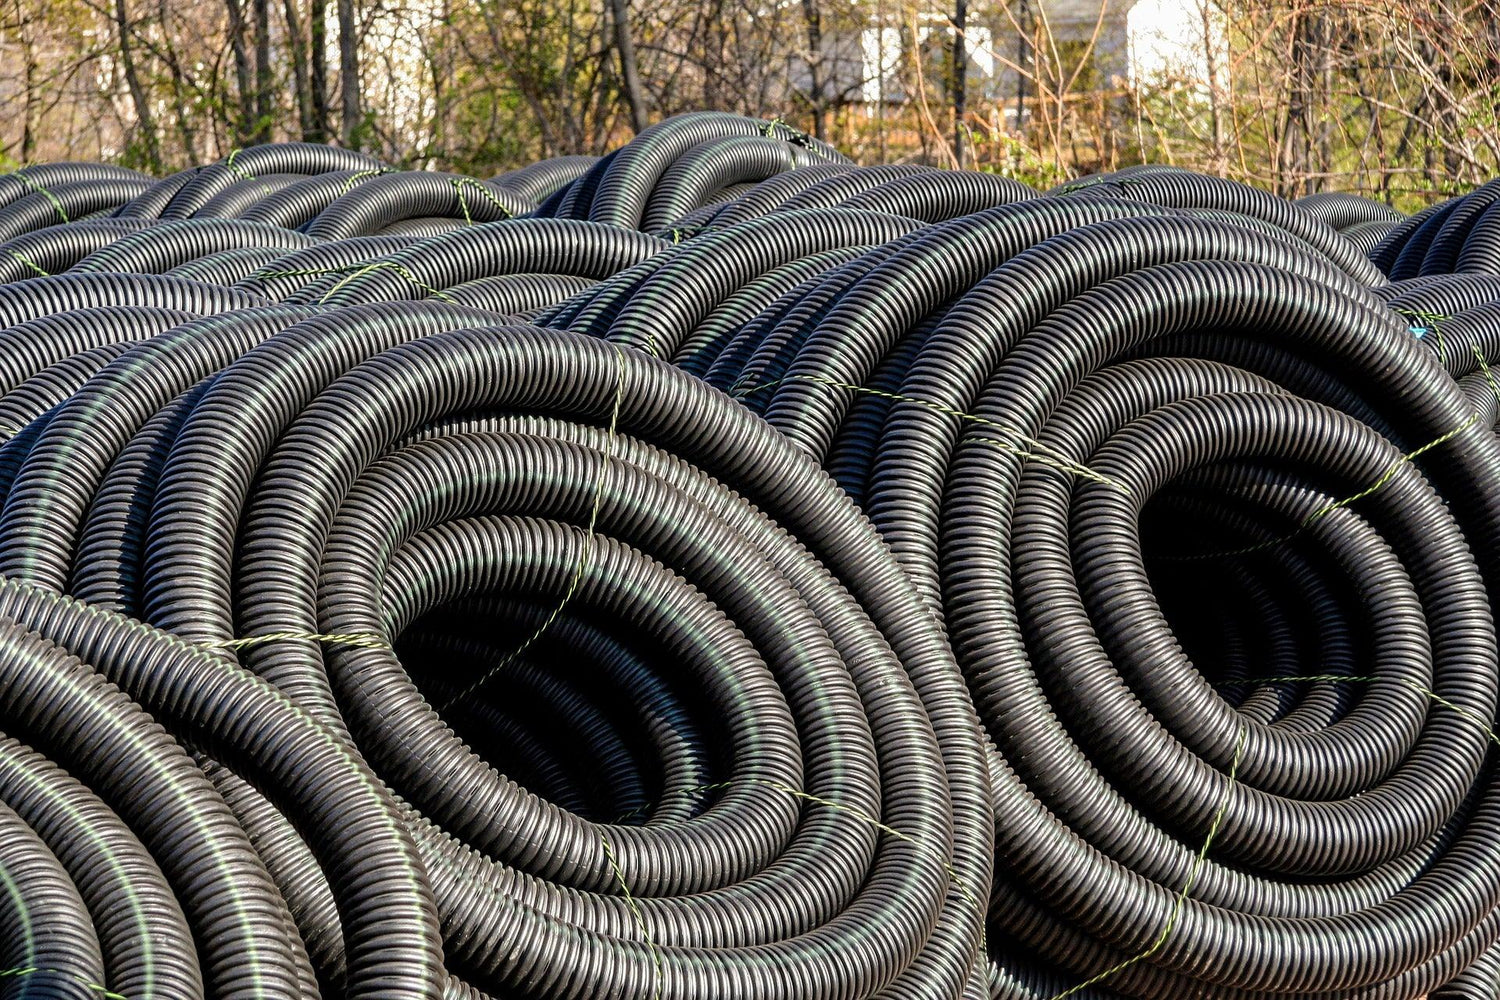 Drainage pipes & junctions - Gardenscapedirect